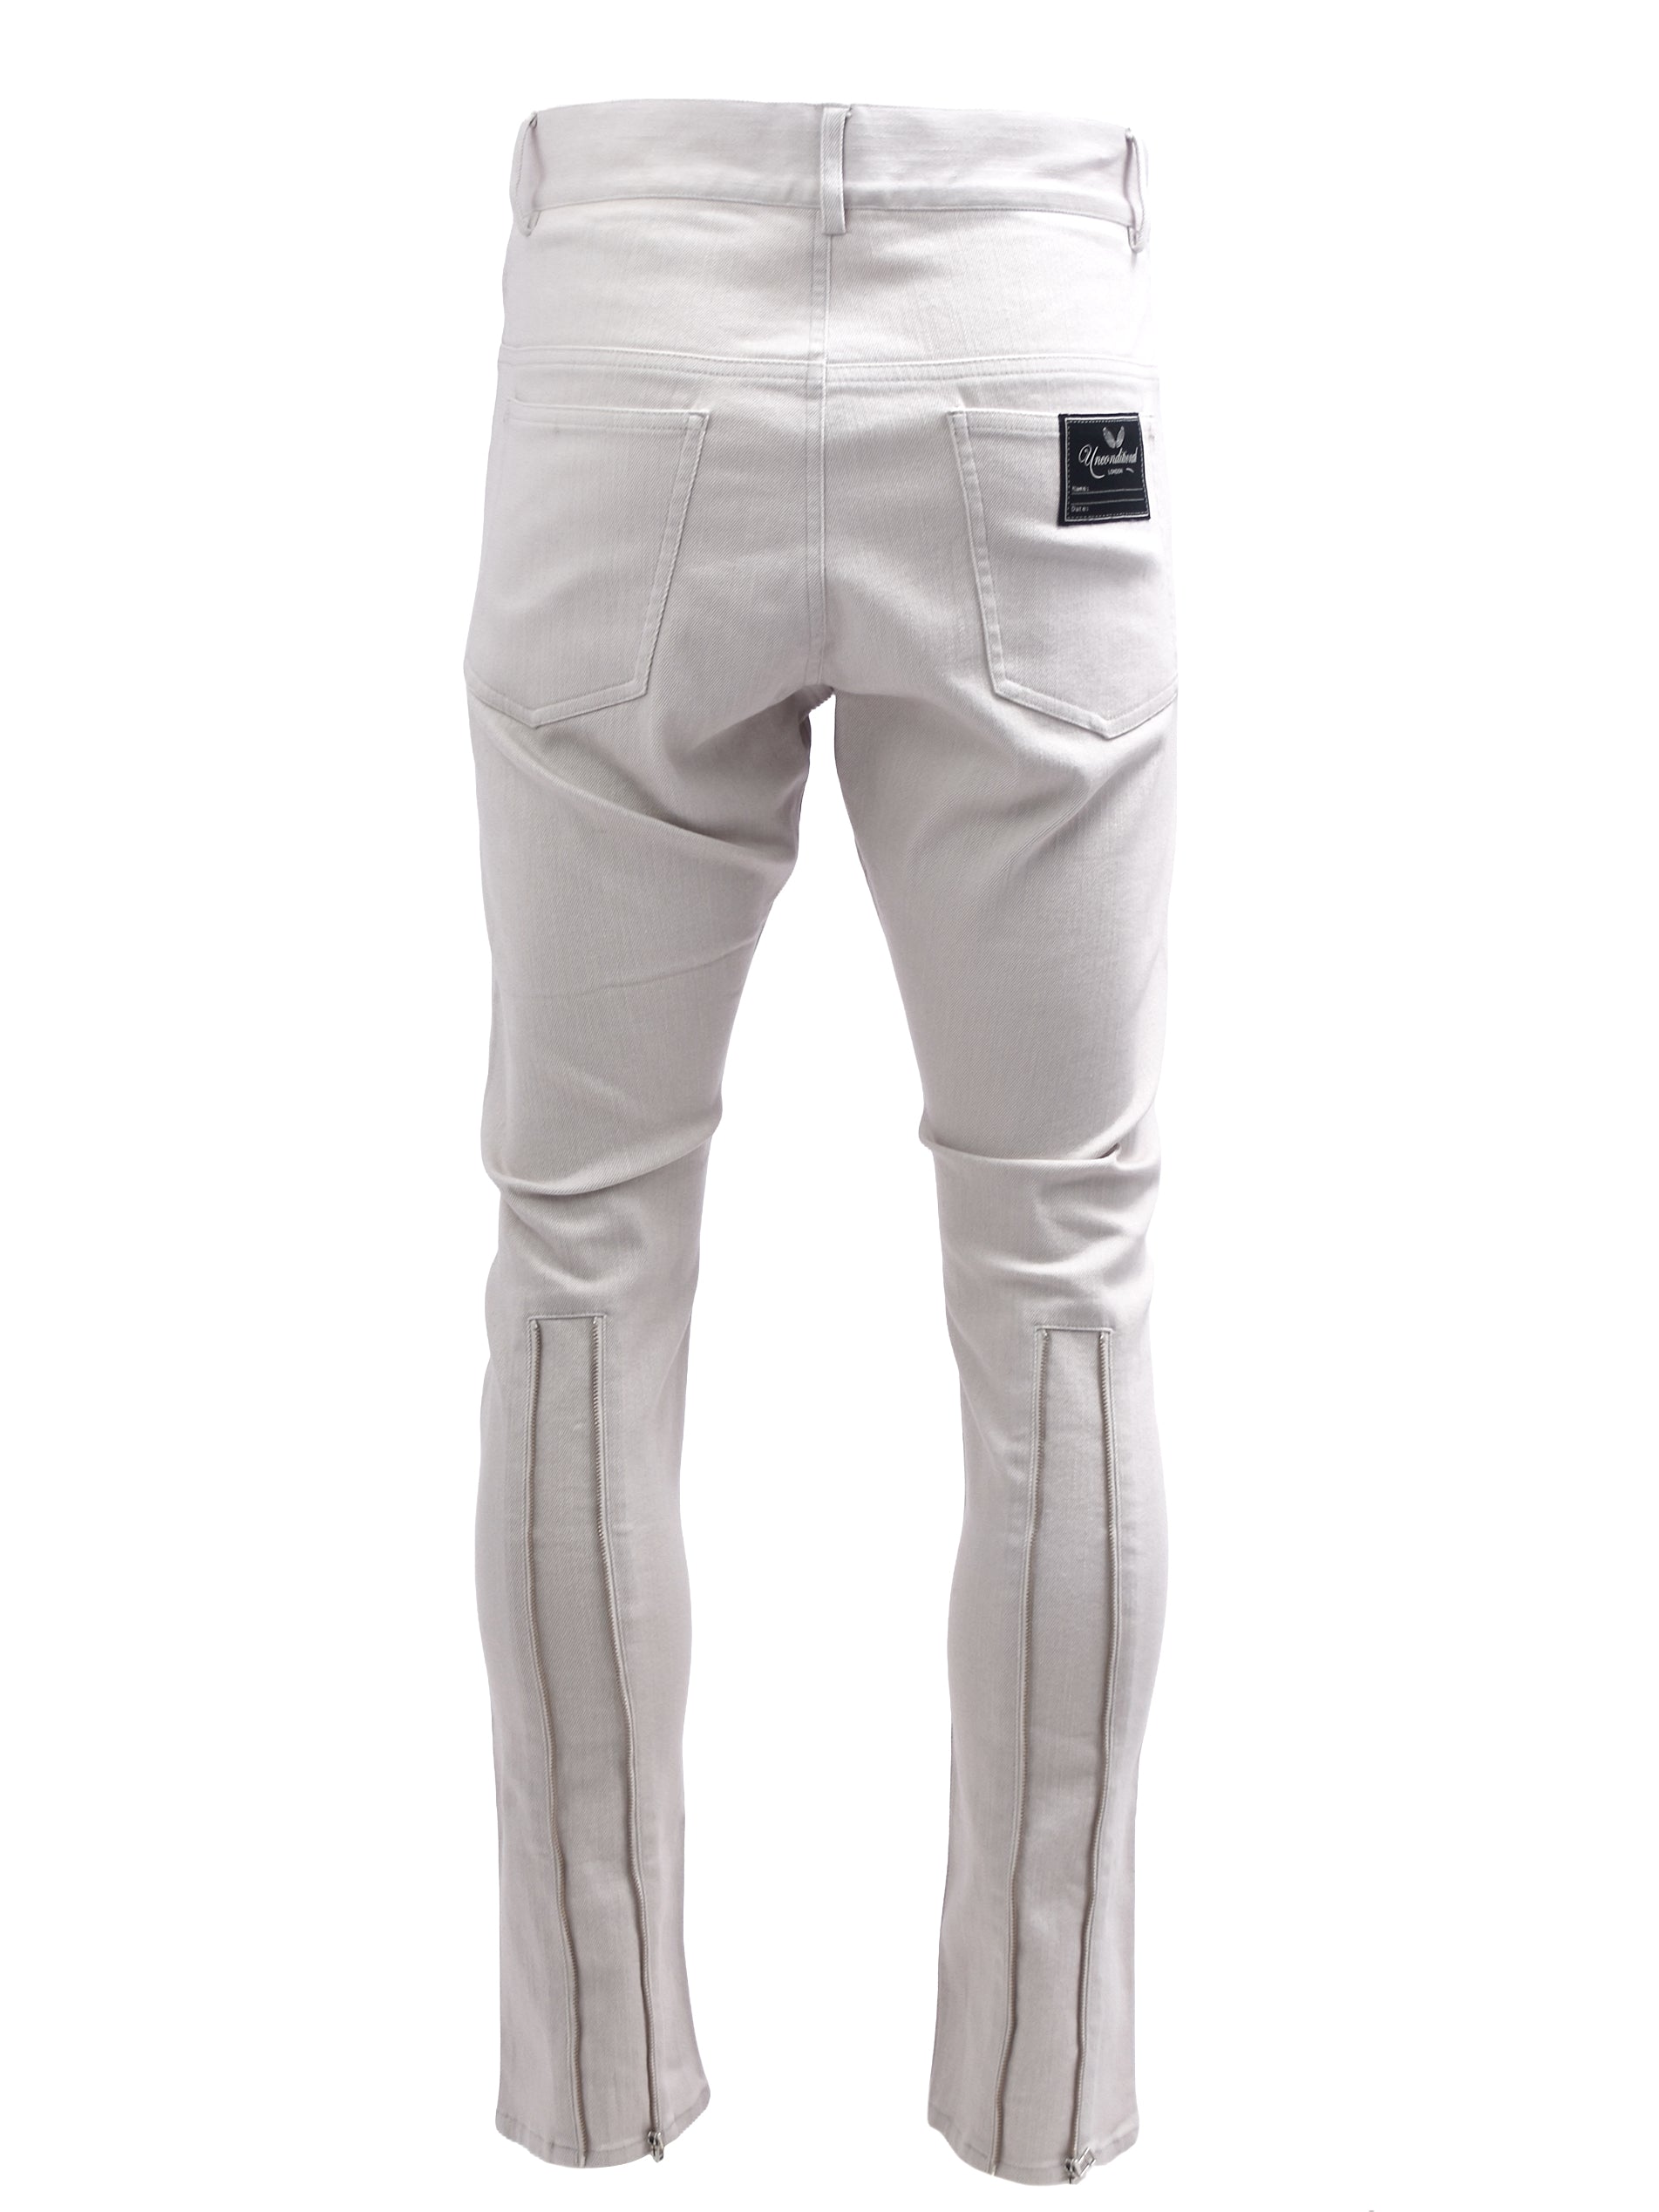 OFF WHITE JEANS WITH LEG ZIP